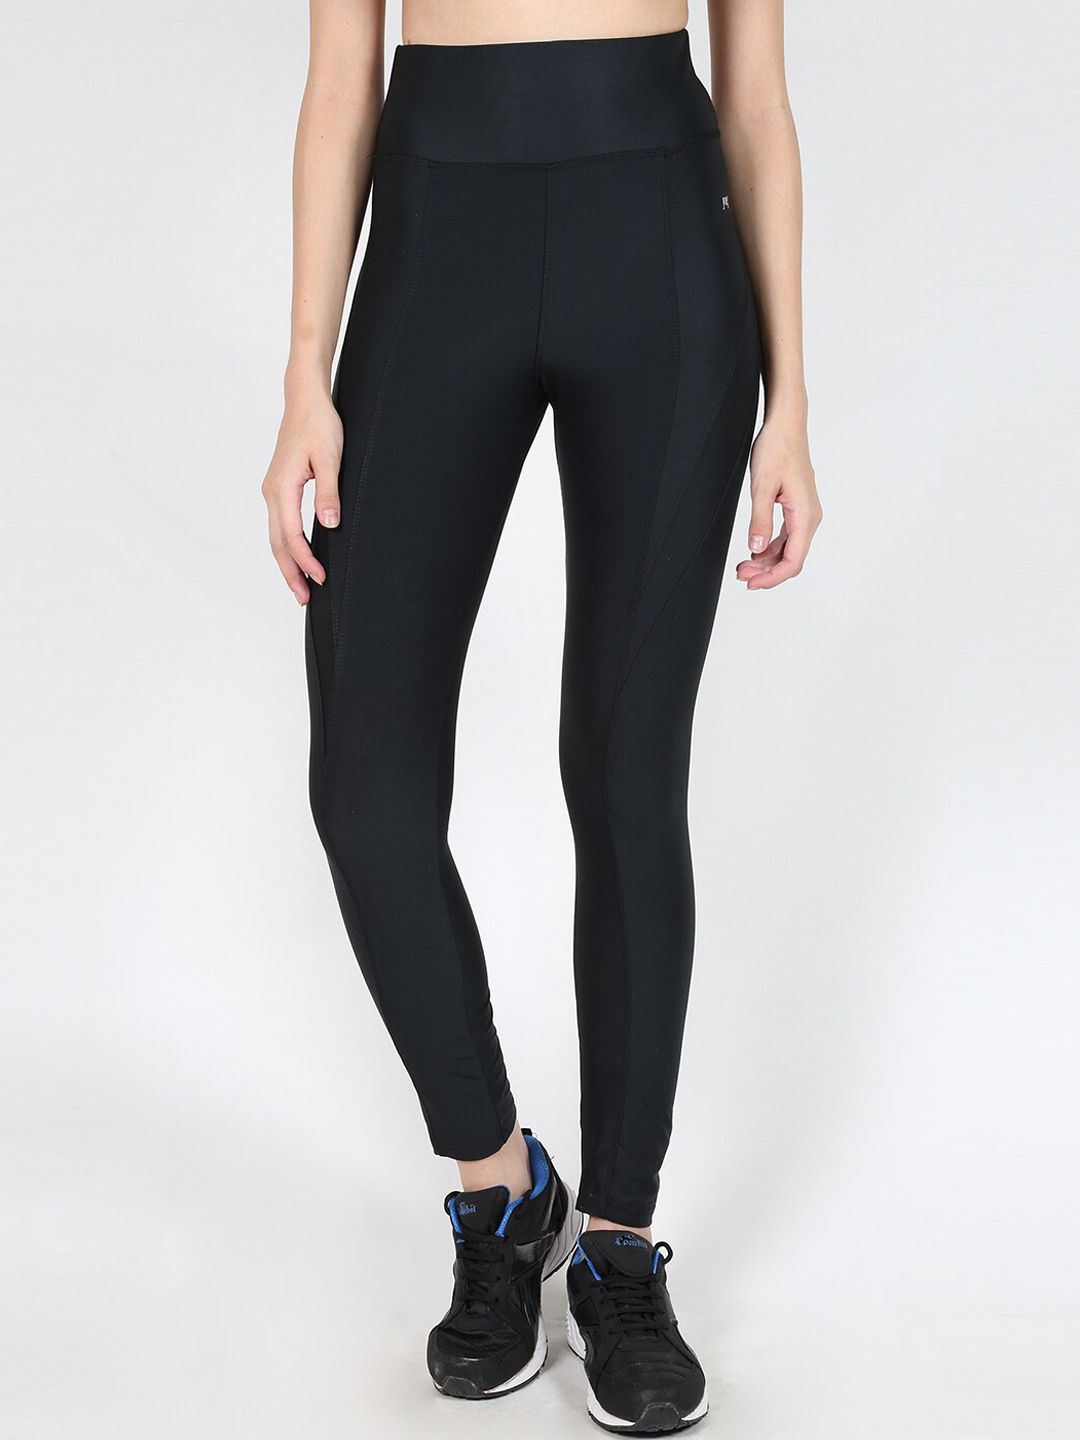 Yogue Activewear Women Black Solid Tights Price in India